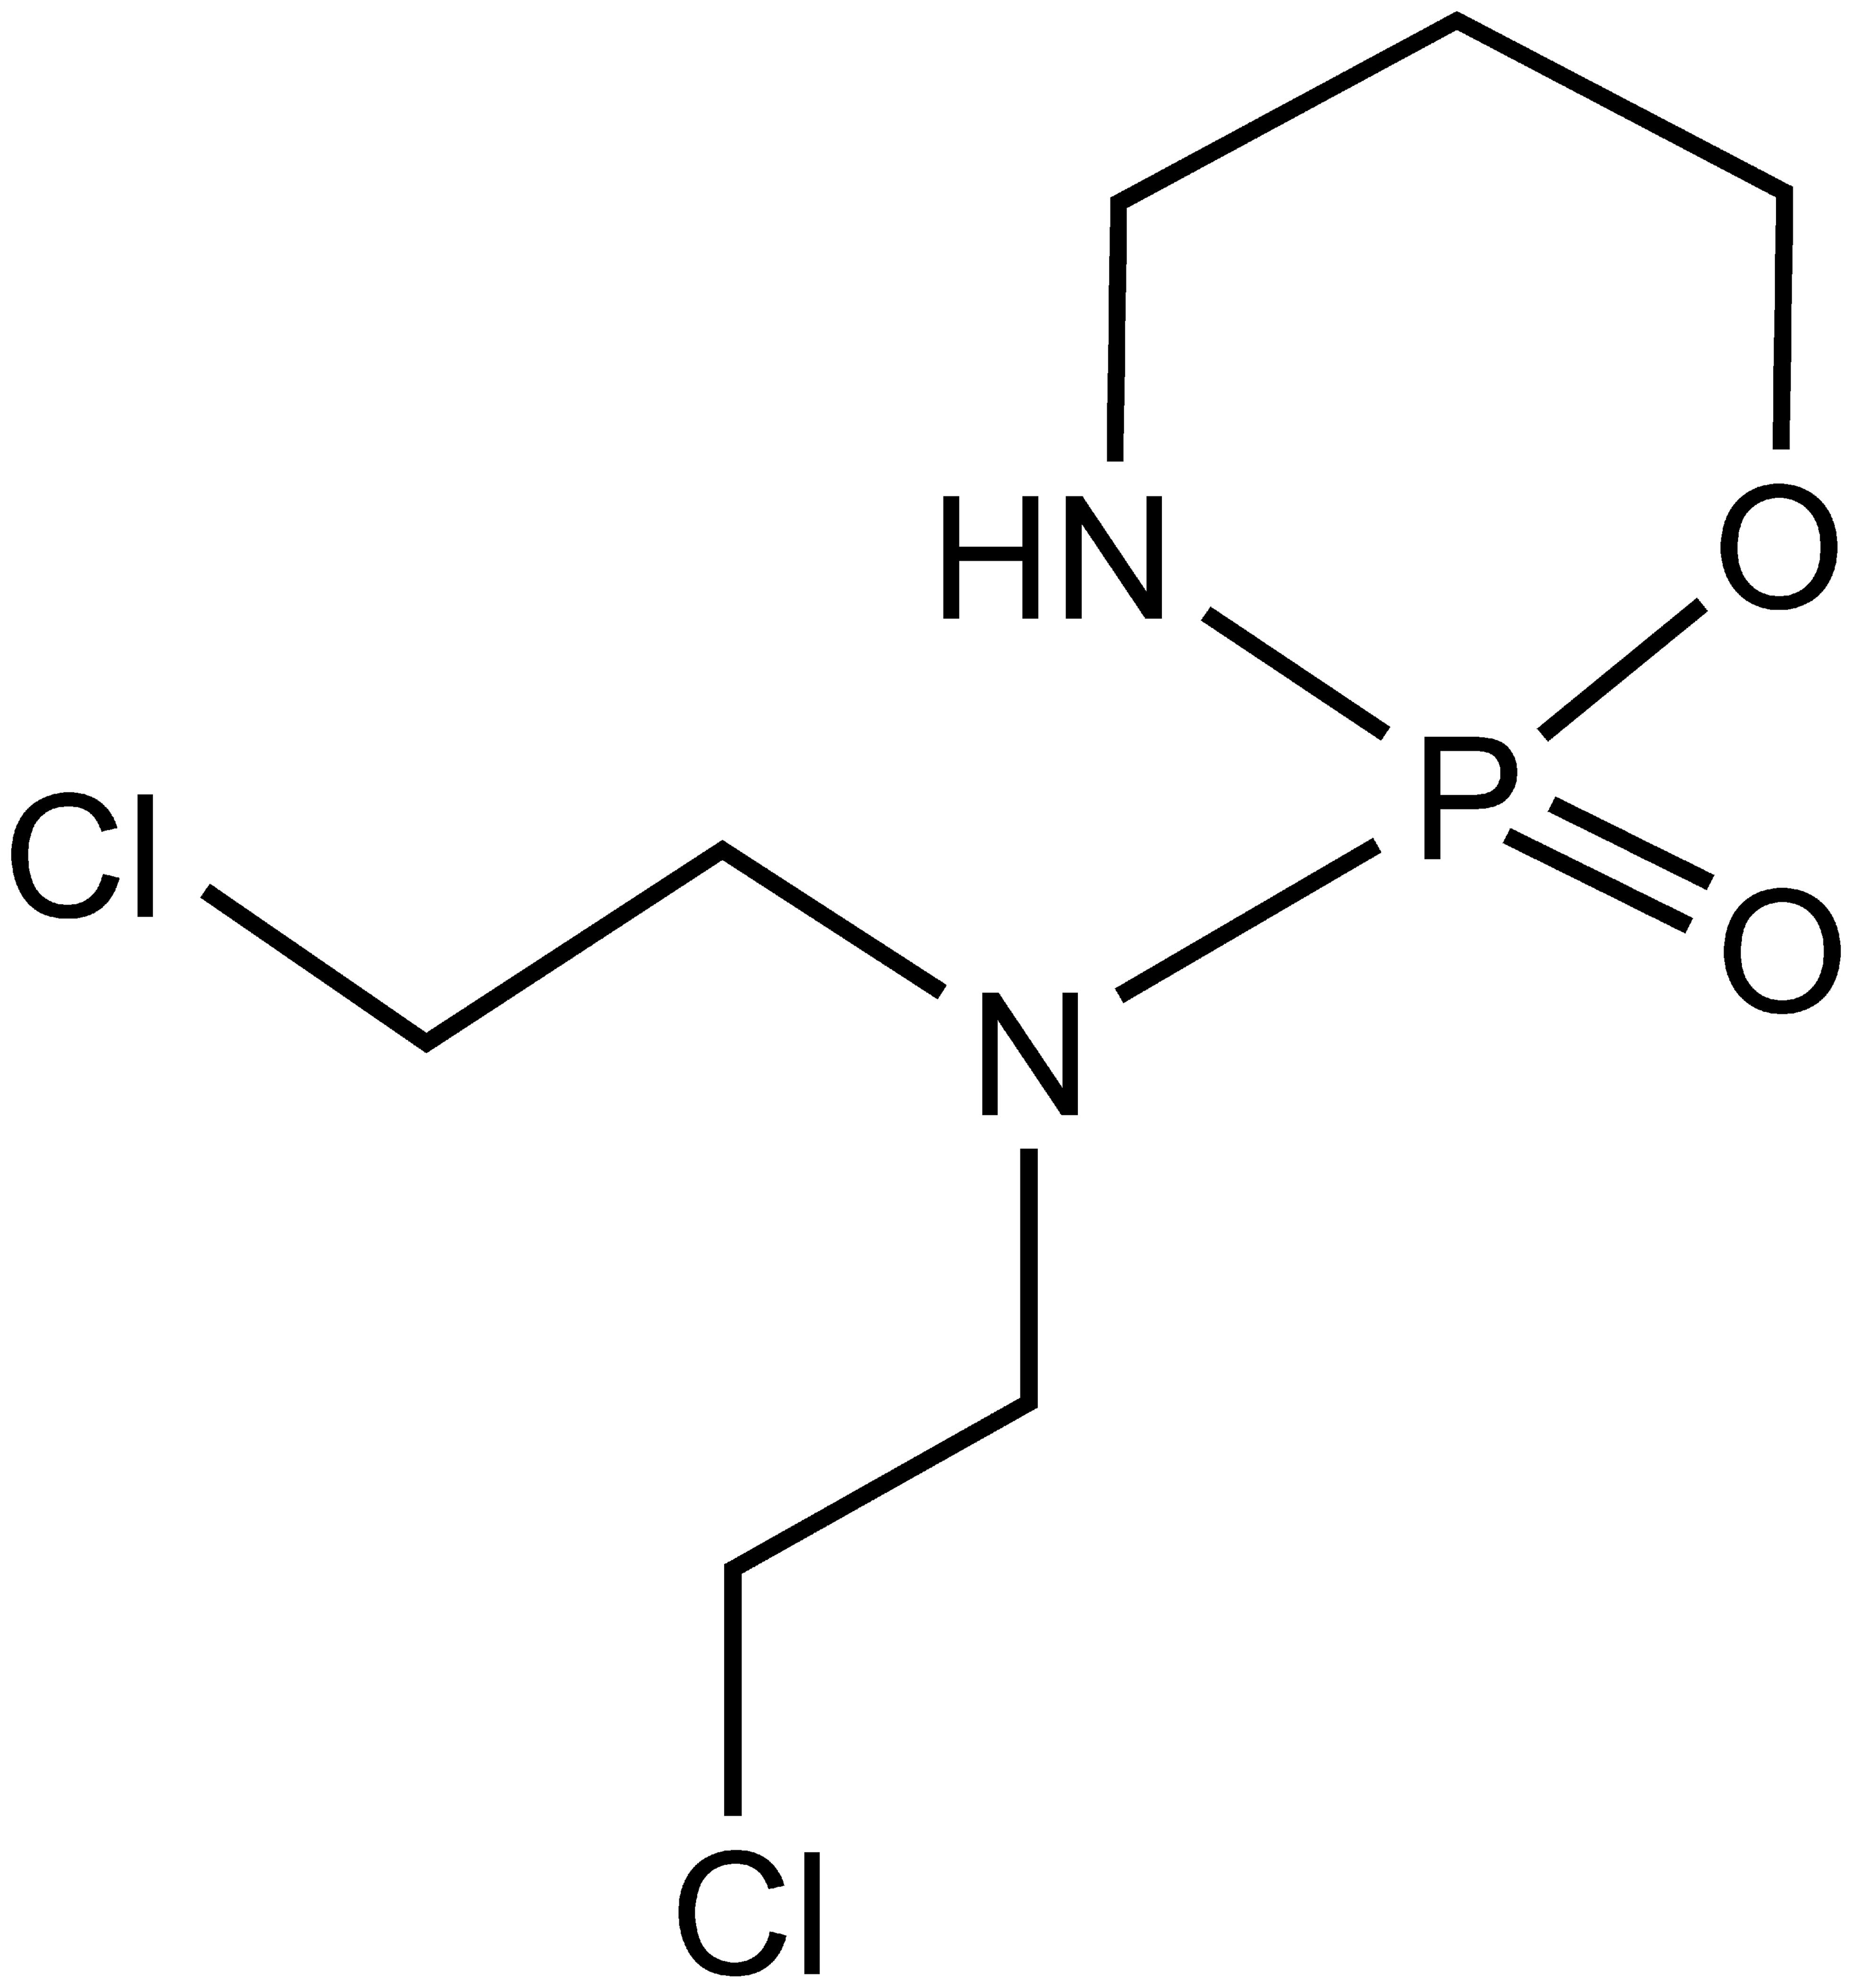 Chemical structure of cyclophosphamide.